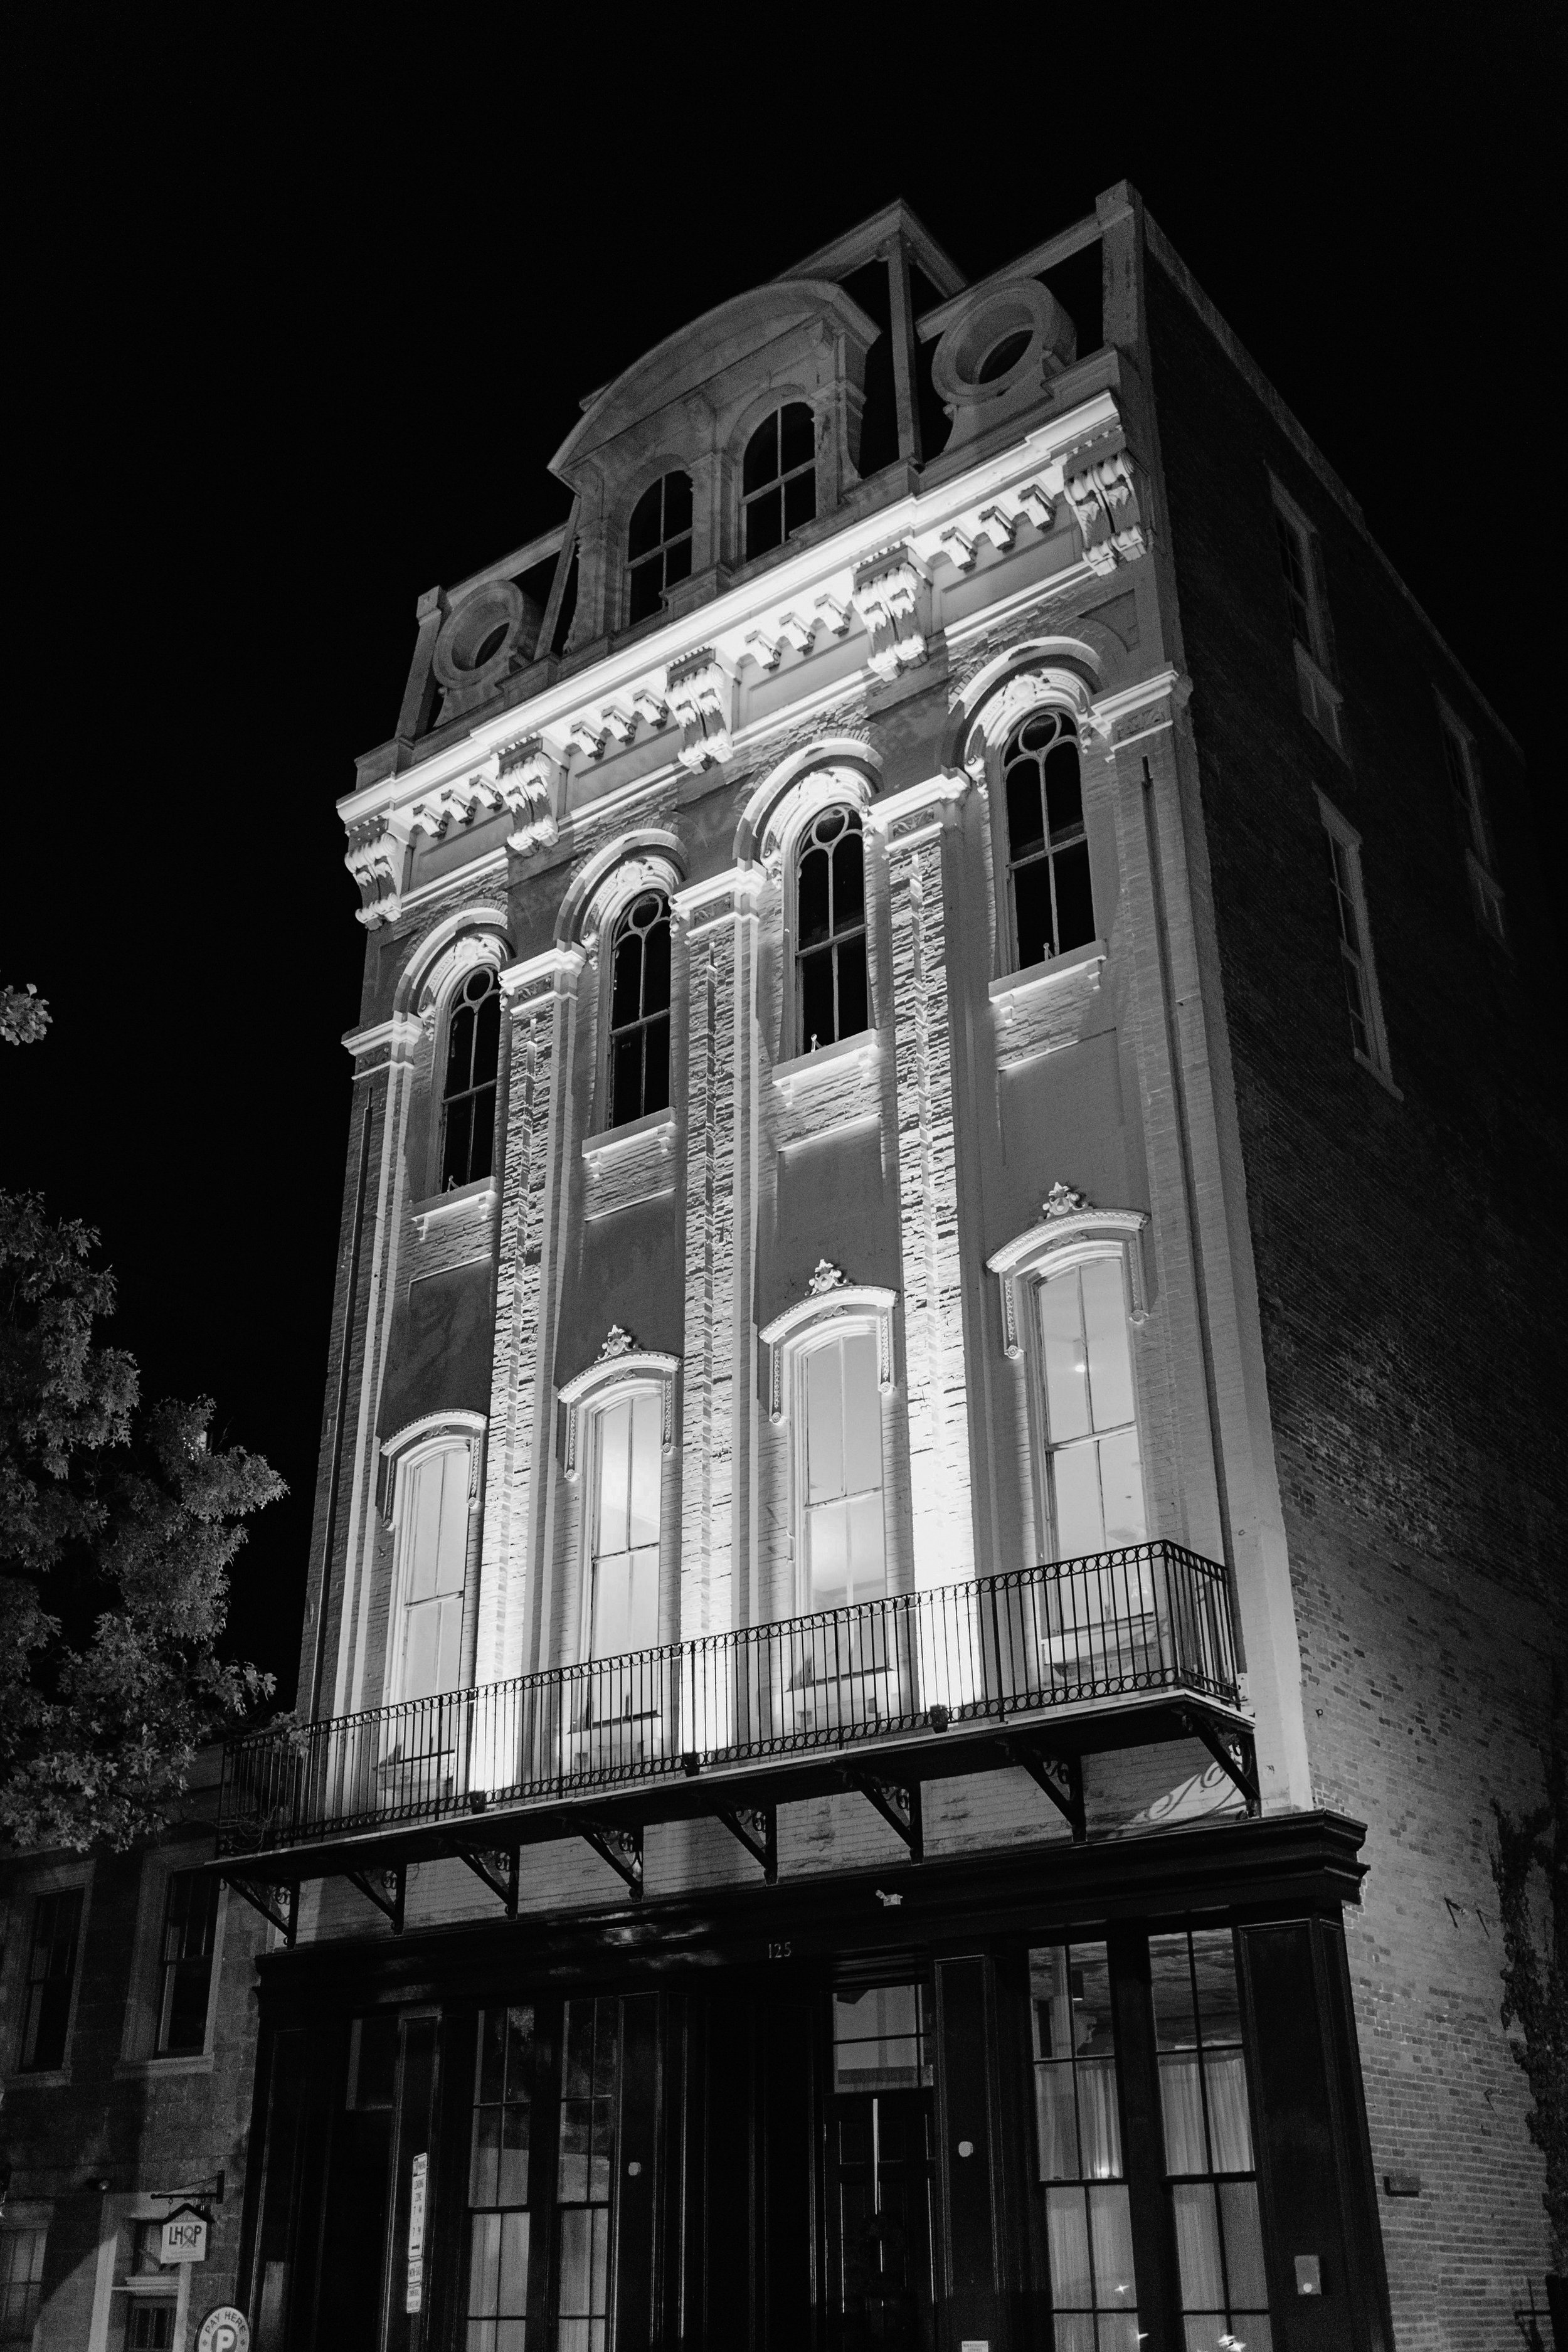 Black and white photo of Excelsior front facade lit up